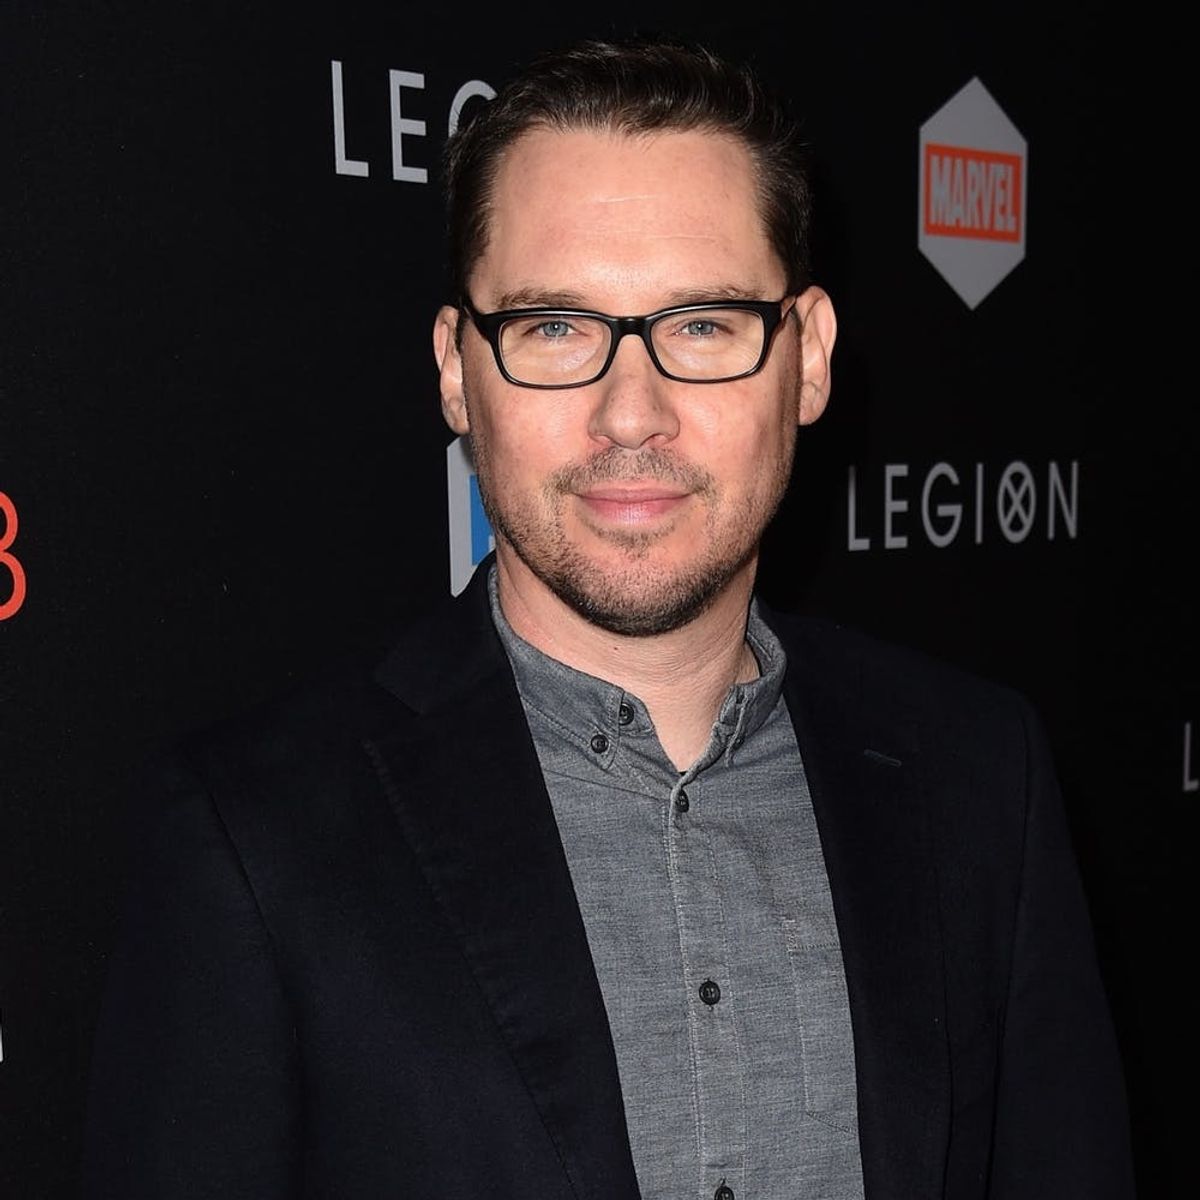 Director Bryan Singer Has Been Fired from the Queen Biopic ‘Bohemian Rhapsody’